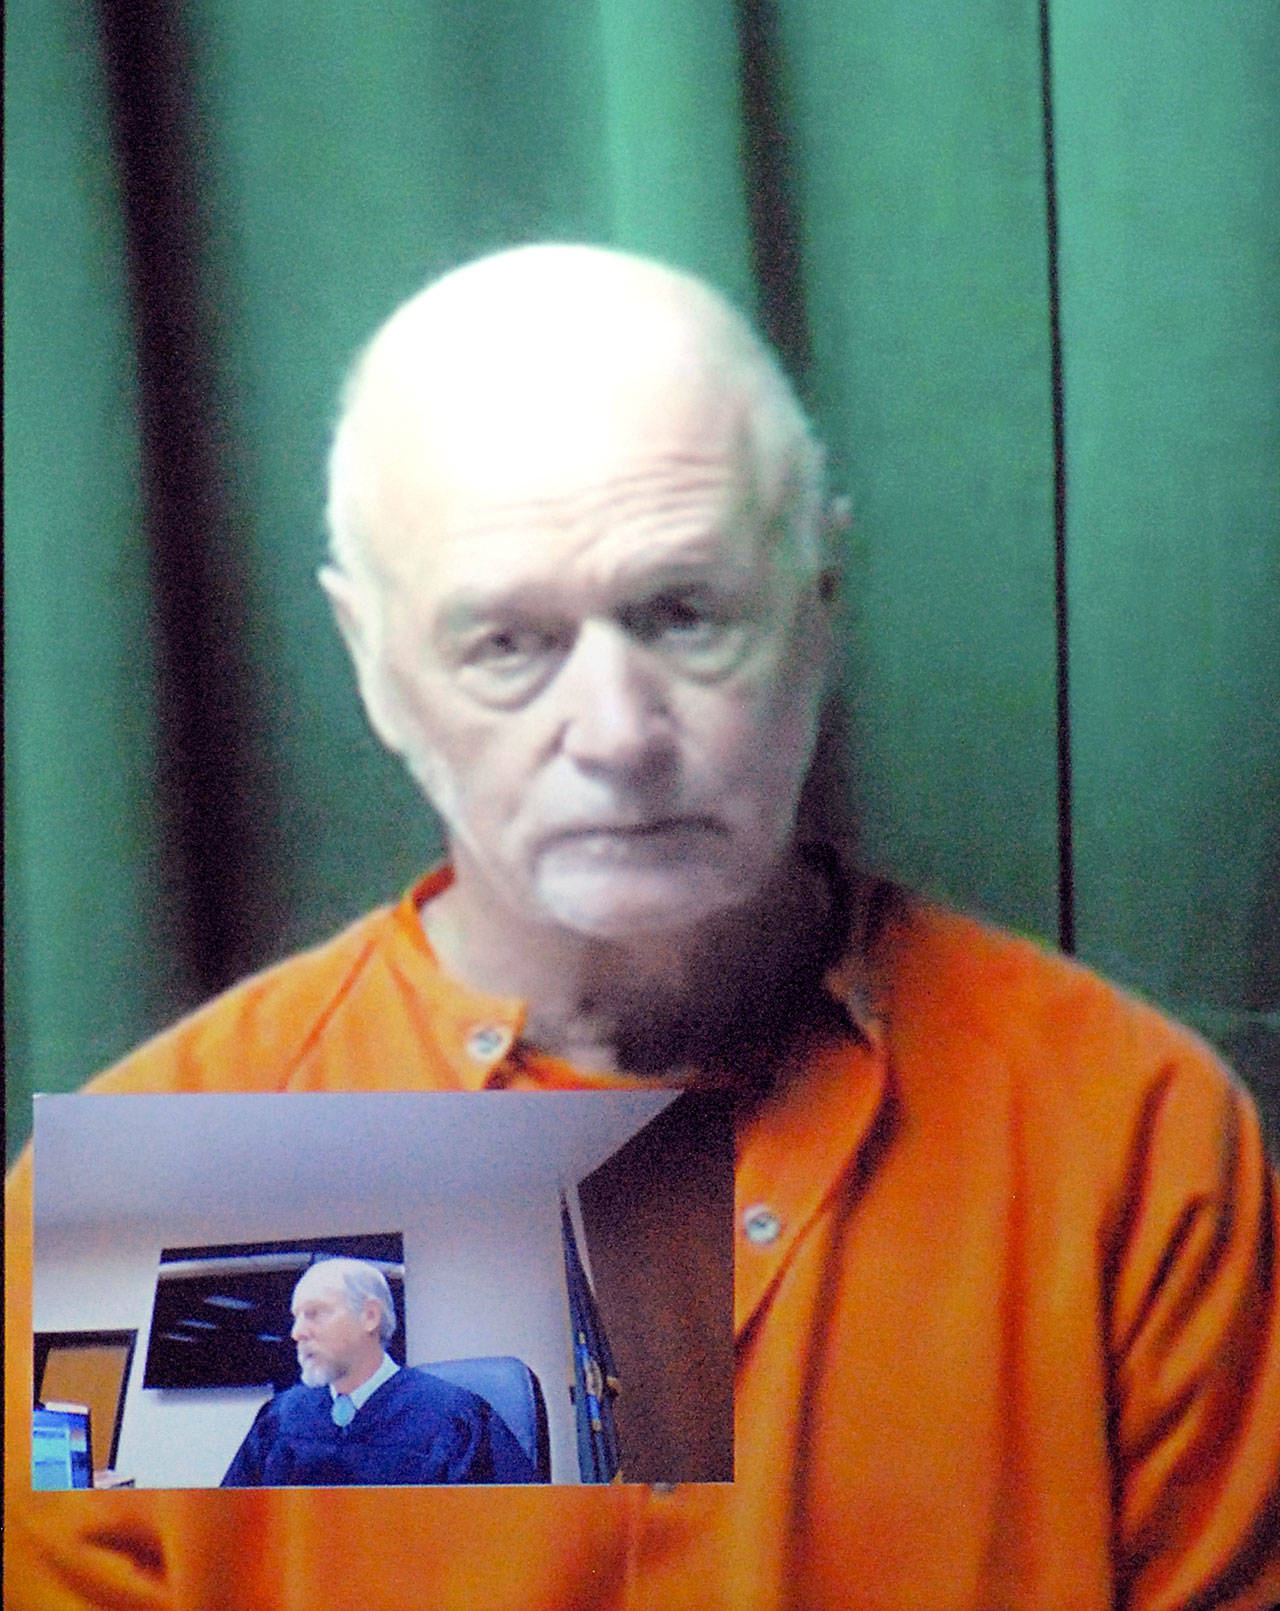 Lynn George Johnson of Sequim appears Wednesday, Feb. 6, by video link before Clallam County Superior Court Judge Brian Coughenour, shown in inset, on multiple charges of child rape and child molestation. Photo by Keith Thorpe/Peninsula Daily News